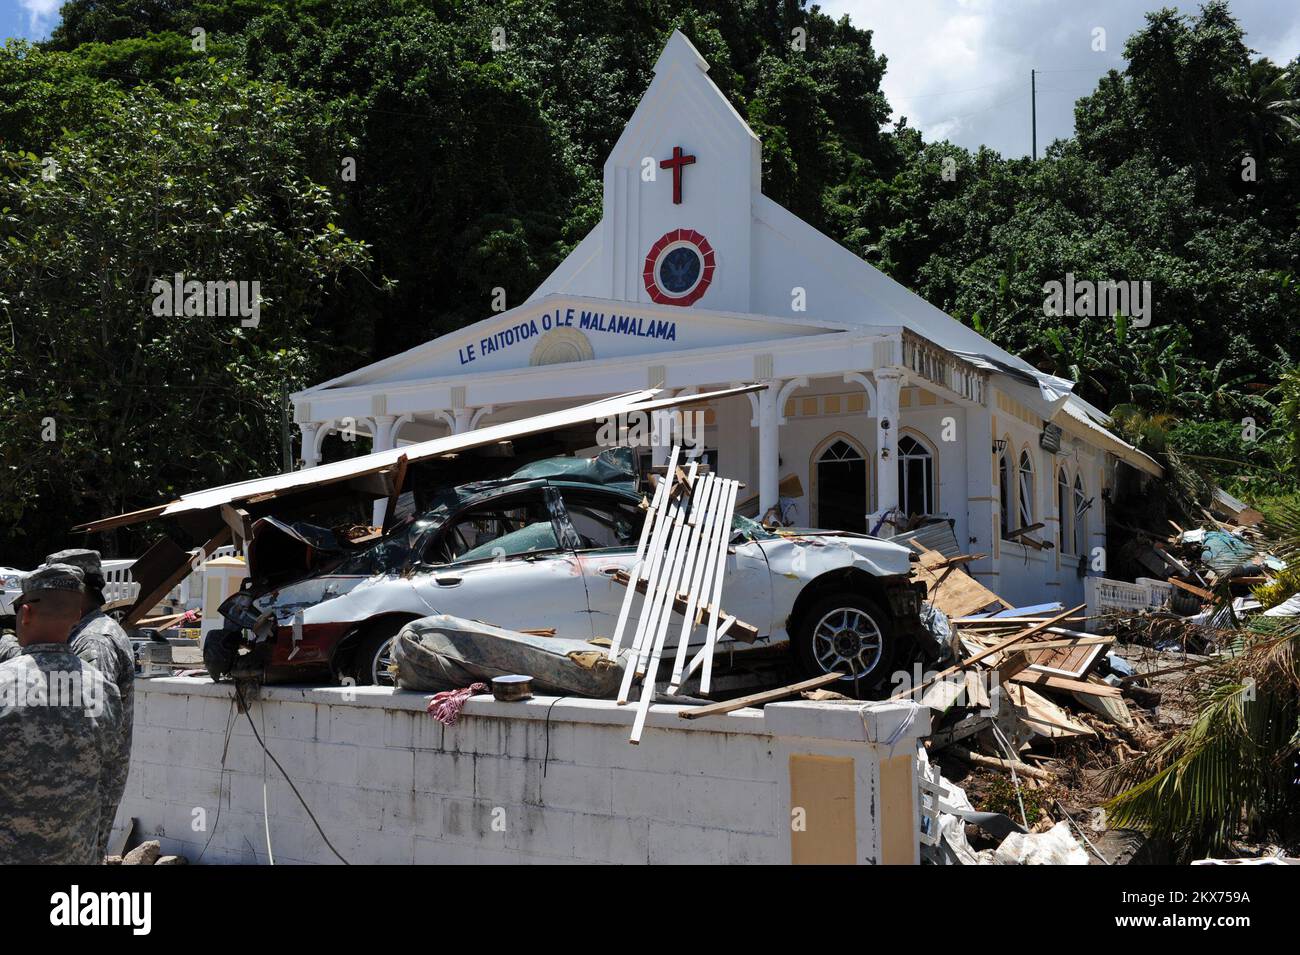 Earthquake   Tsunami - Leone, American Samoa, October 2, 2009   Debris of every kind is spread across the yard of a church. The power of the recent tsunami is demonstrated by this car which was pushed uphill to the front of a church.. American Samoa Earthquake, Tsunami, and Flooding. Photographs Relating to Disasters and Emergency Management Programs, Activities, and Officials Stock Photo